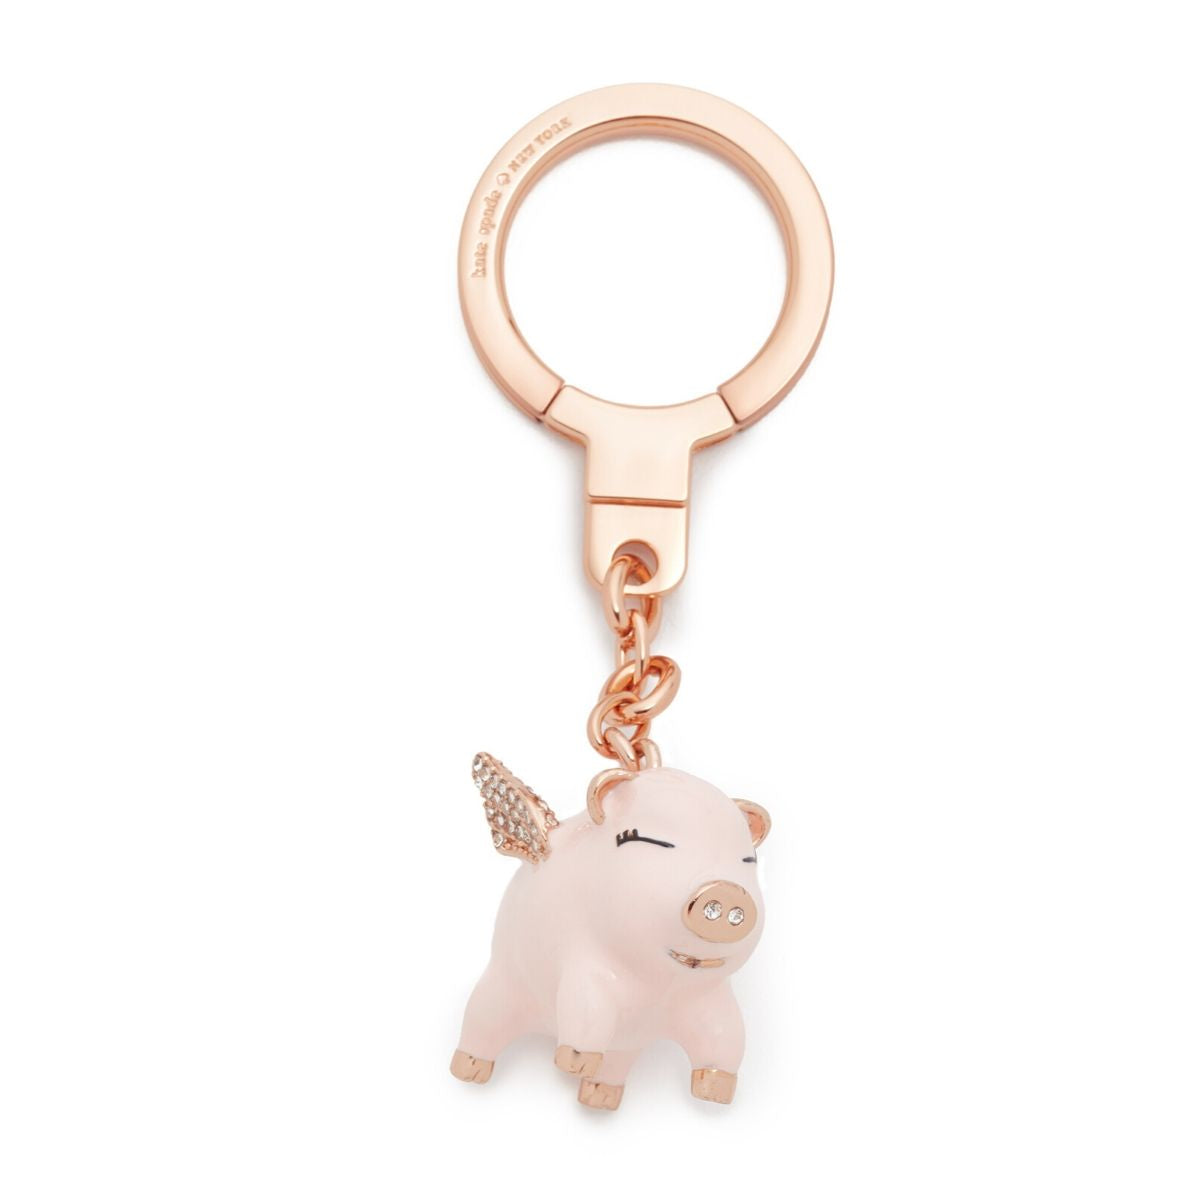 Golden Flying Pig Flexible Keychain, Pigasus Easy Open Key Ring, Jasper  When Pigs Fly Key Holder, Pig With Wings Keychain 